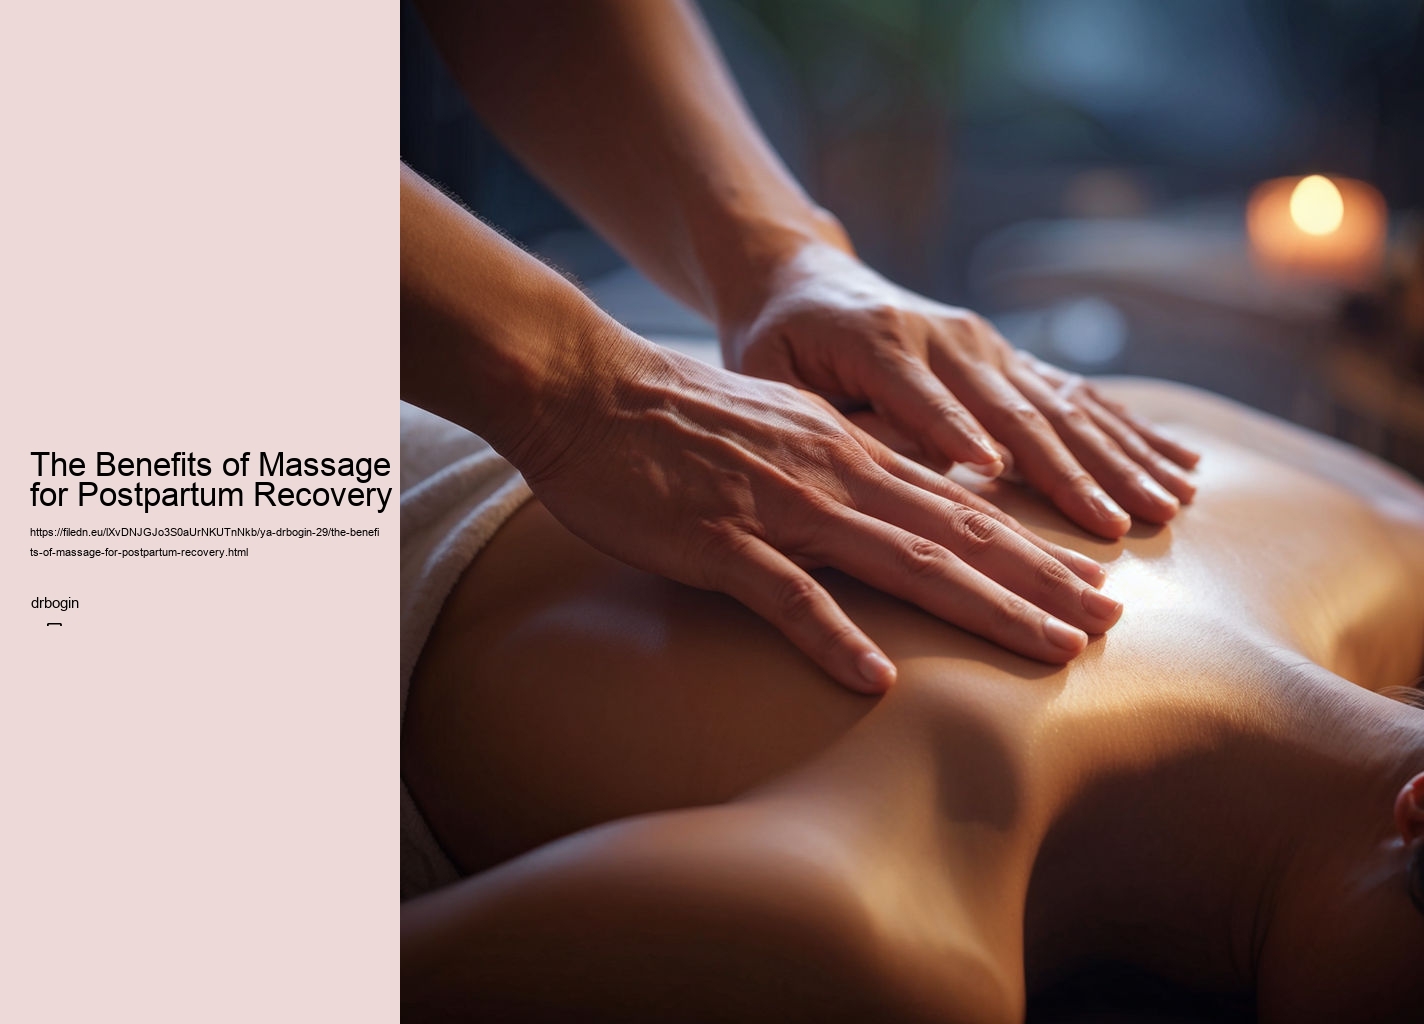 The Benefits of Massage for Postpartum Recovery